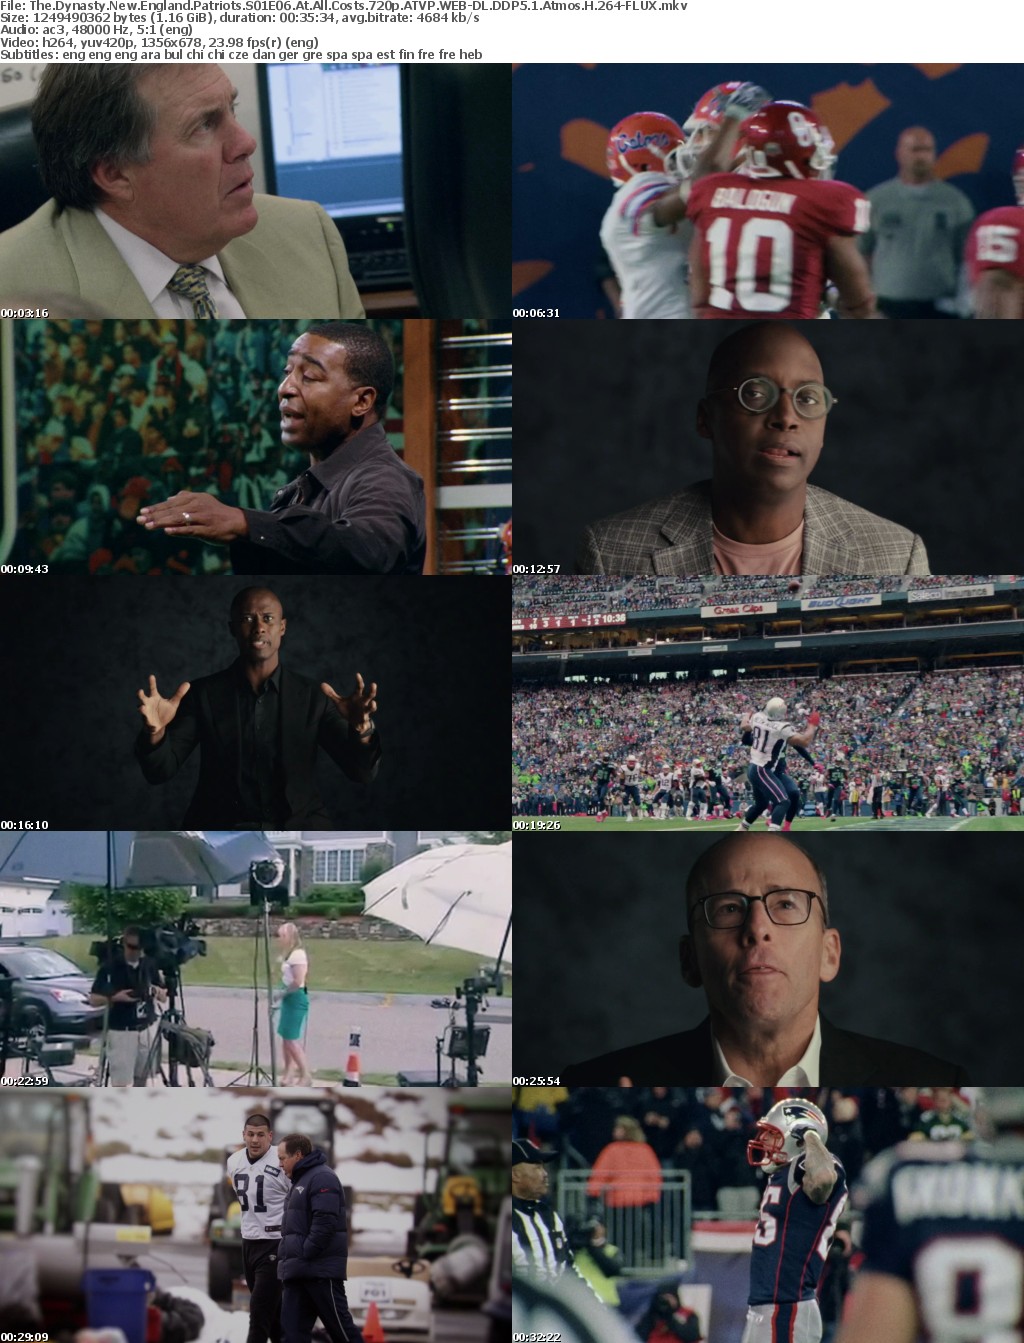 The Dynasty New England Patriots S01E06 At All Costs 720p ATVP WEB-DL DDP5 1 Atmos H 264-FLUX